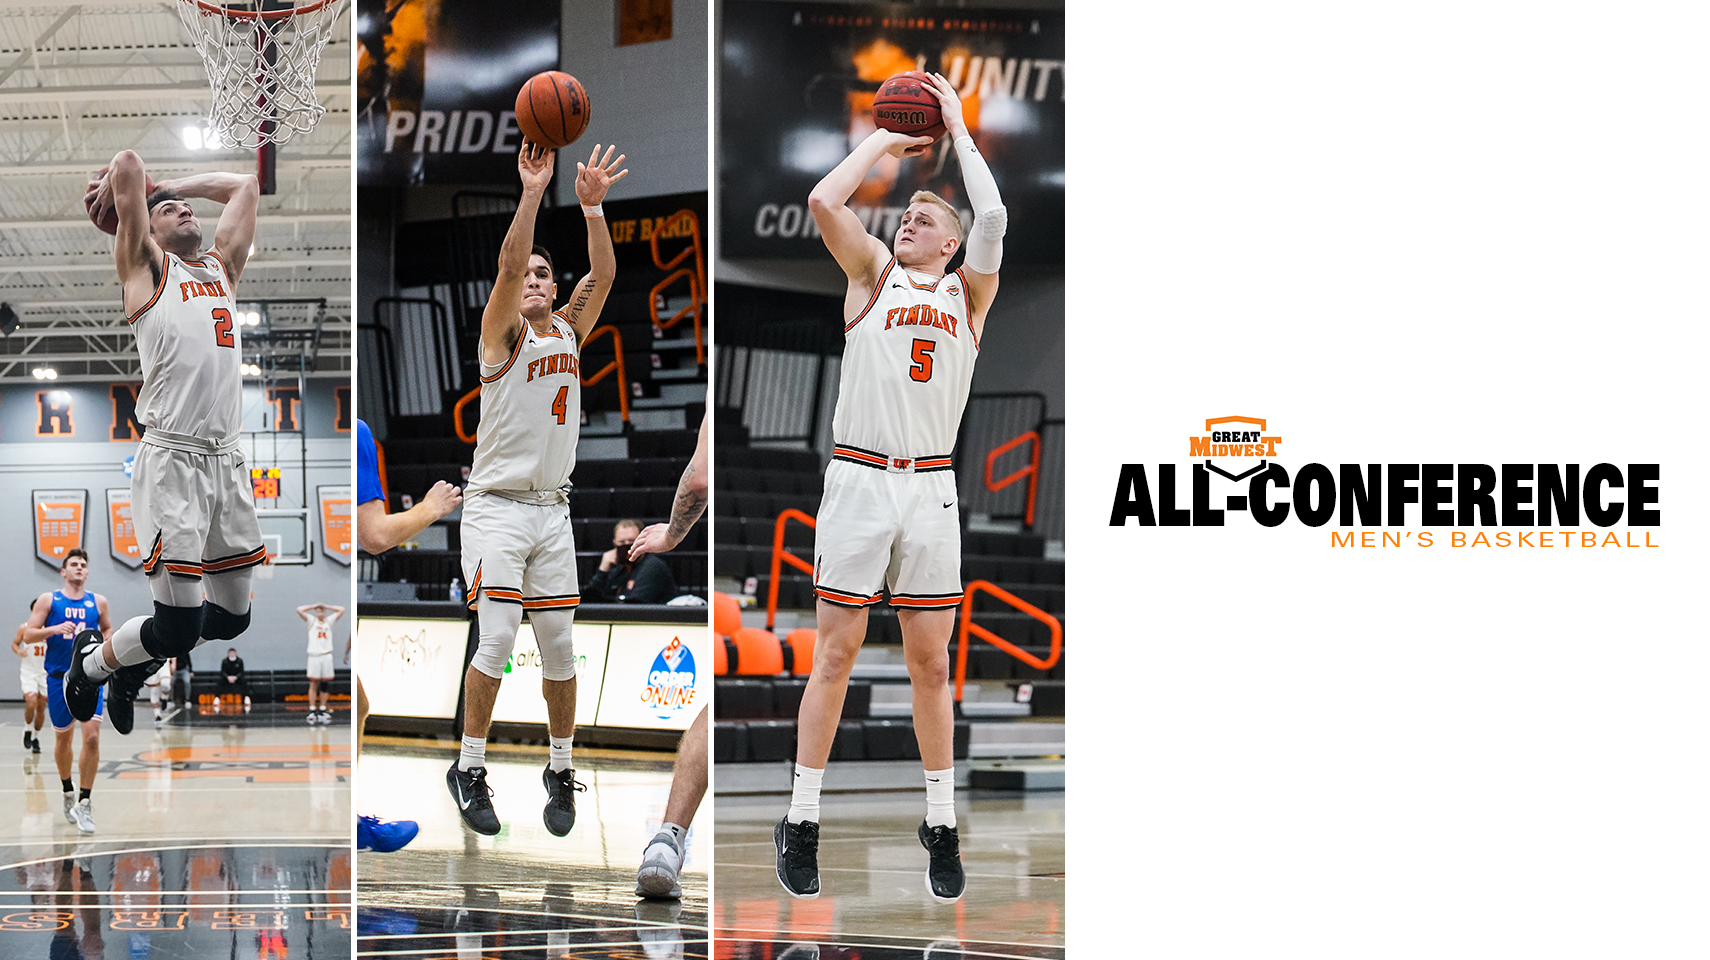 Men's basketball all-conference graphic